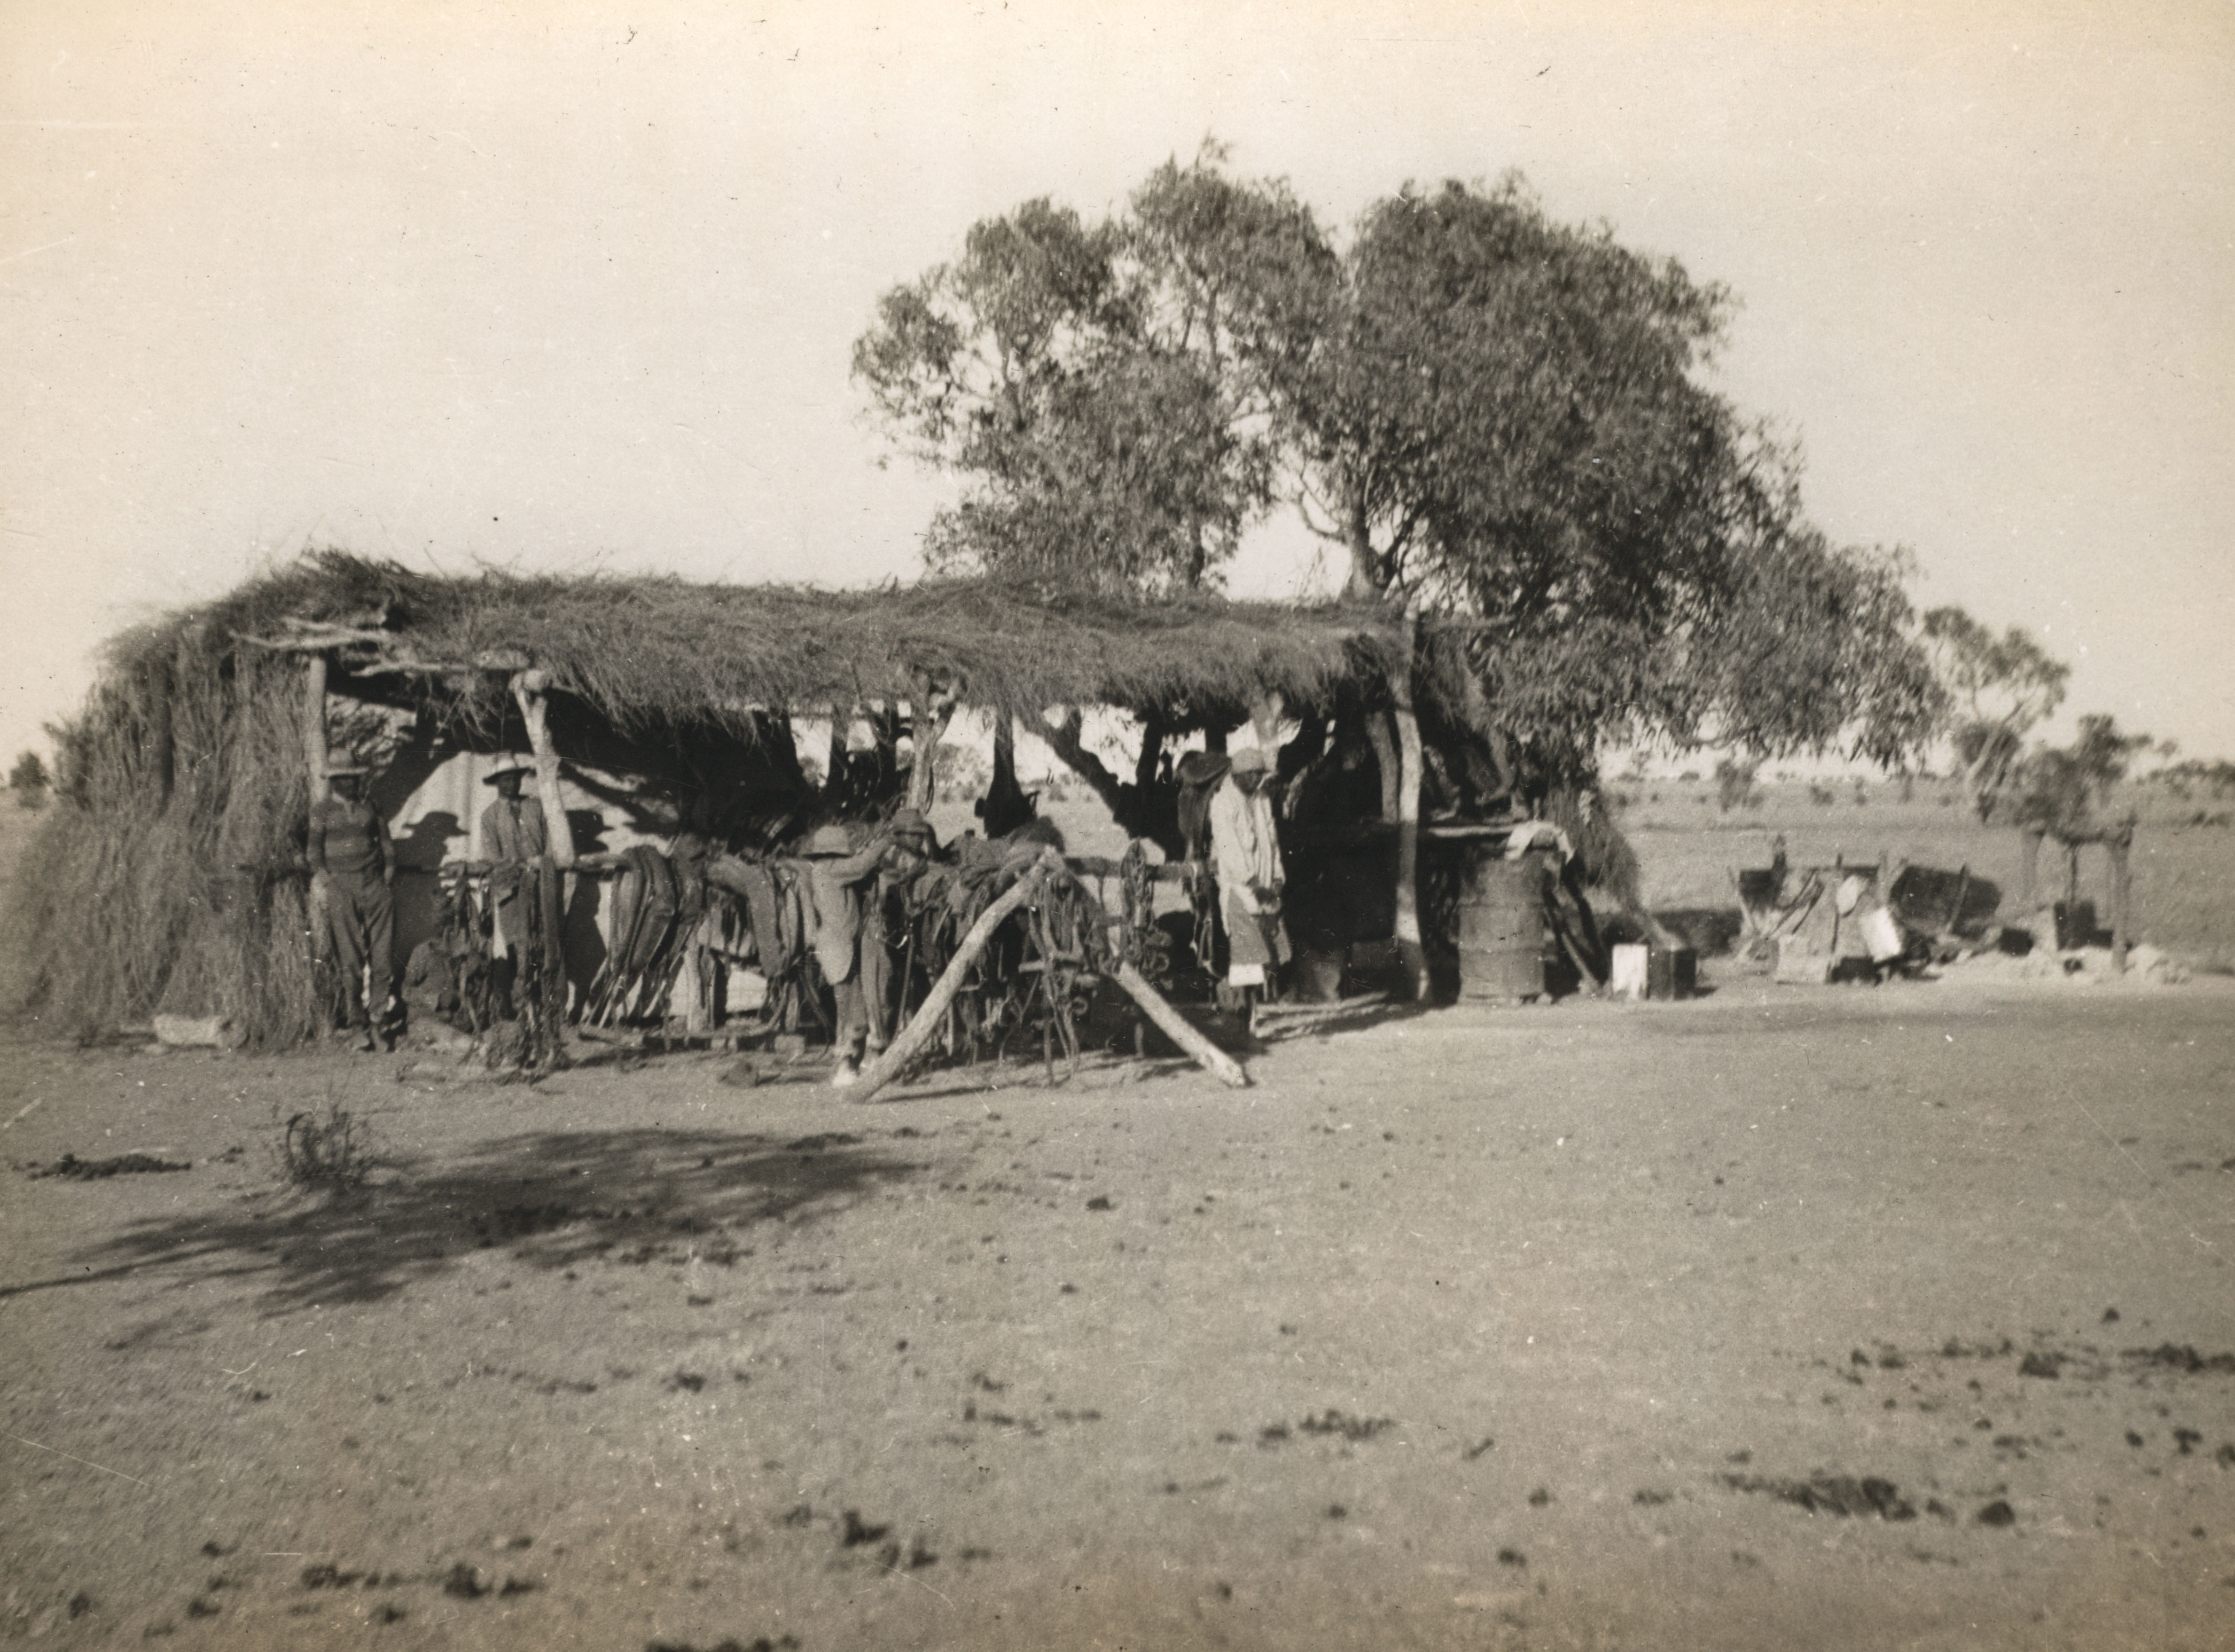 Stockmen from the Australian Agricultural Company setting up camp in the McArthur River region, Northern Territory, 22 July 1934 (Z241-211).